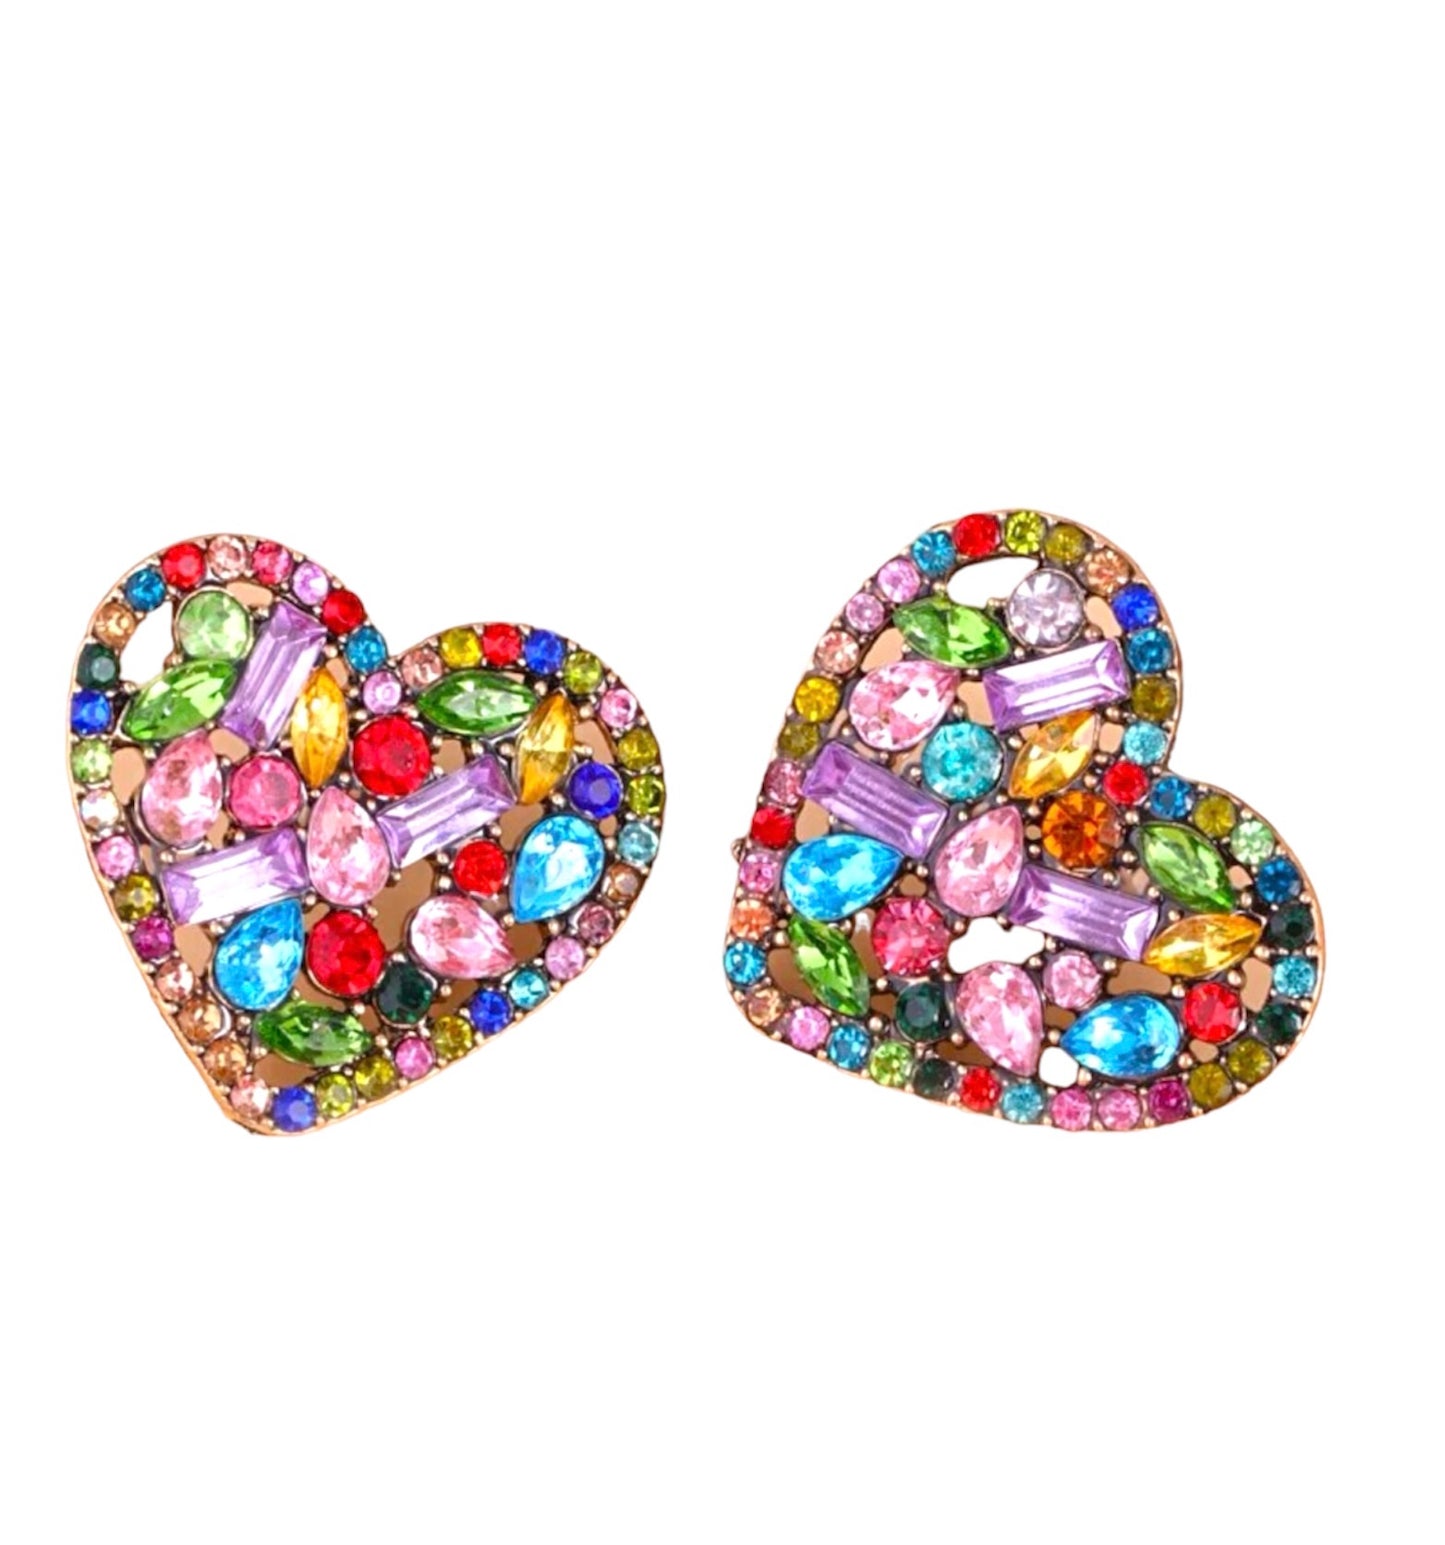 Hearts (blue, yellow, pink, green)